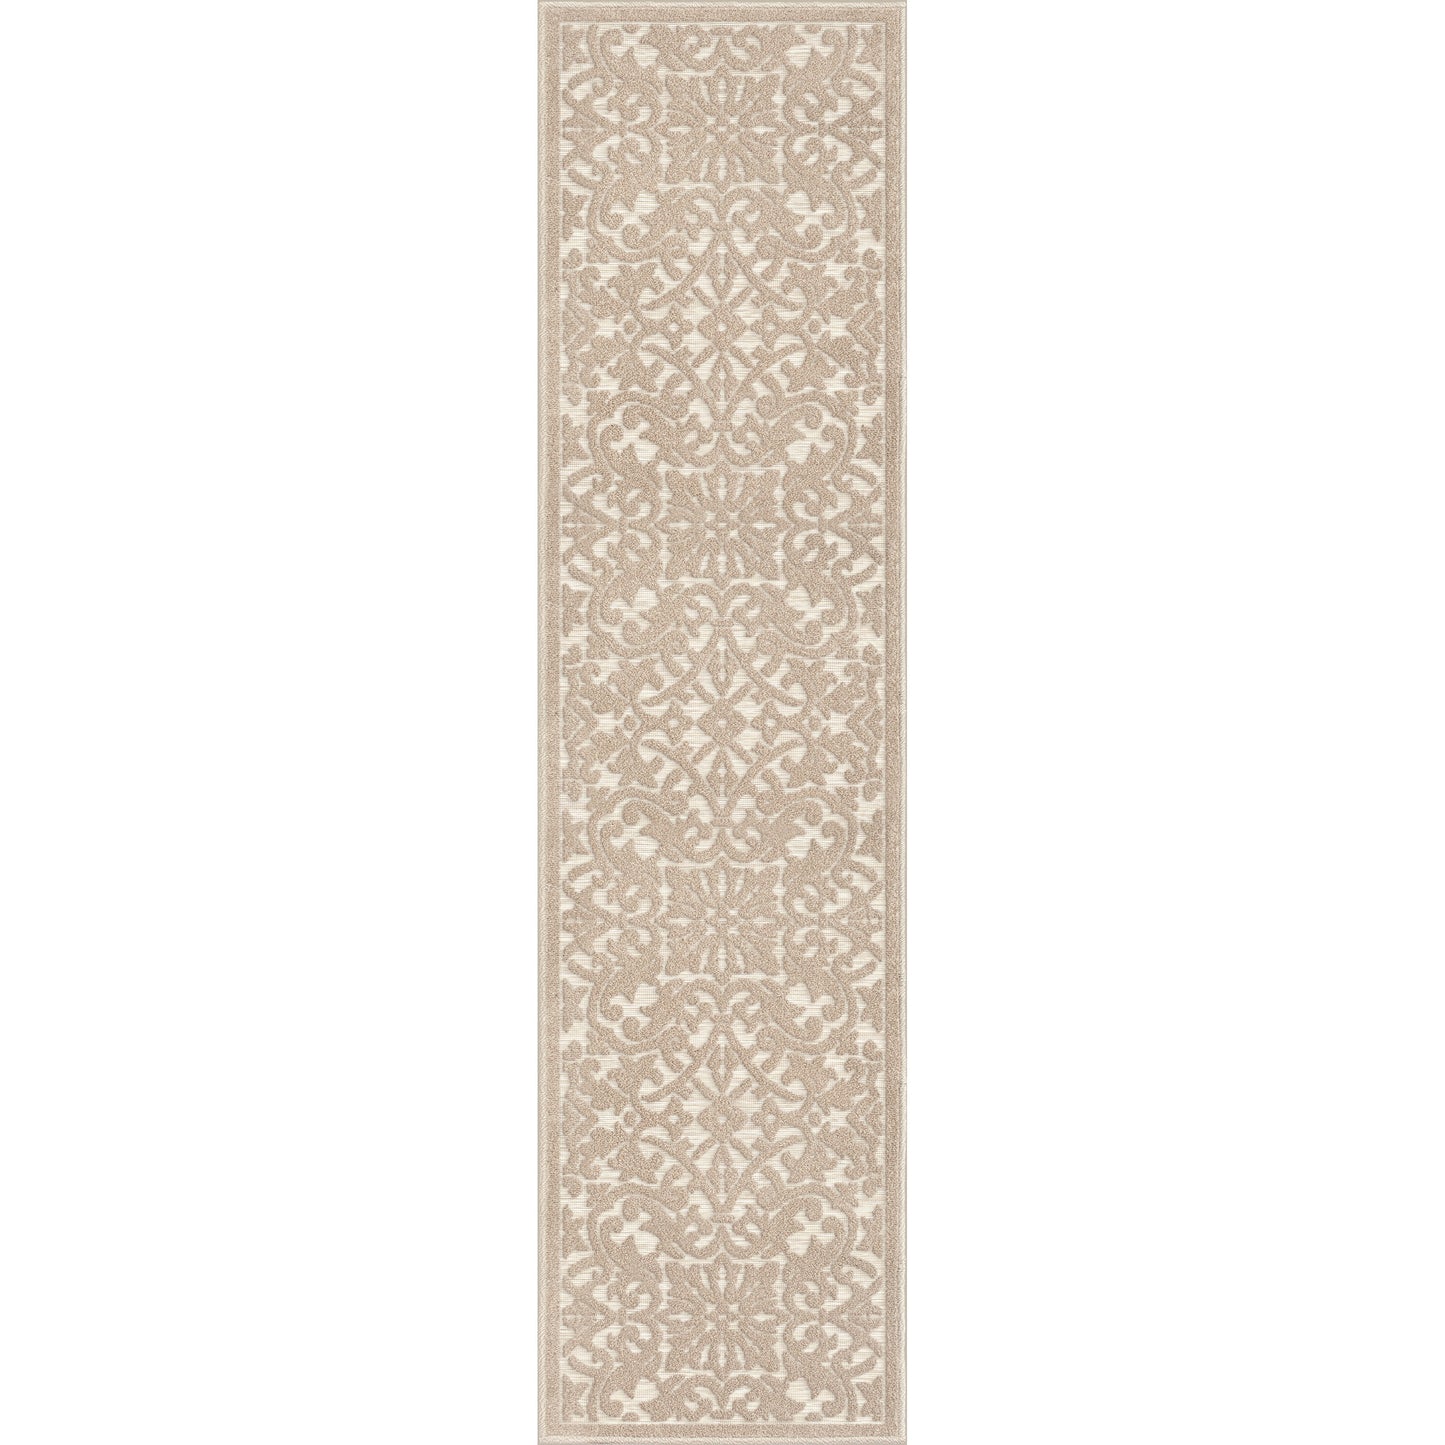 Orian Rugs Boucle' Biscay BCL/BISC Driftwood Area Rug